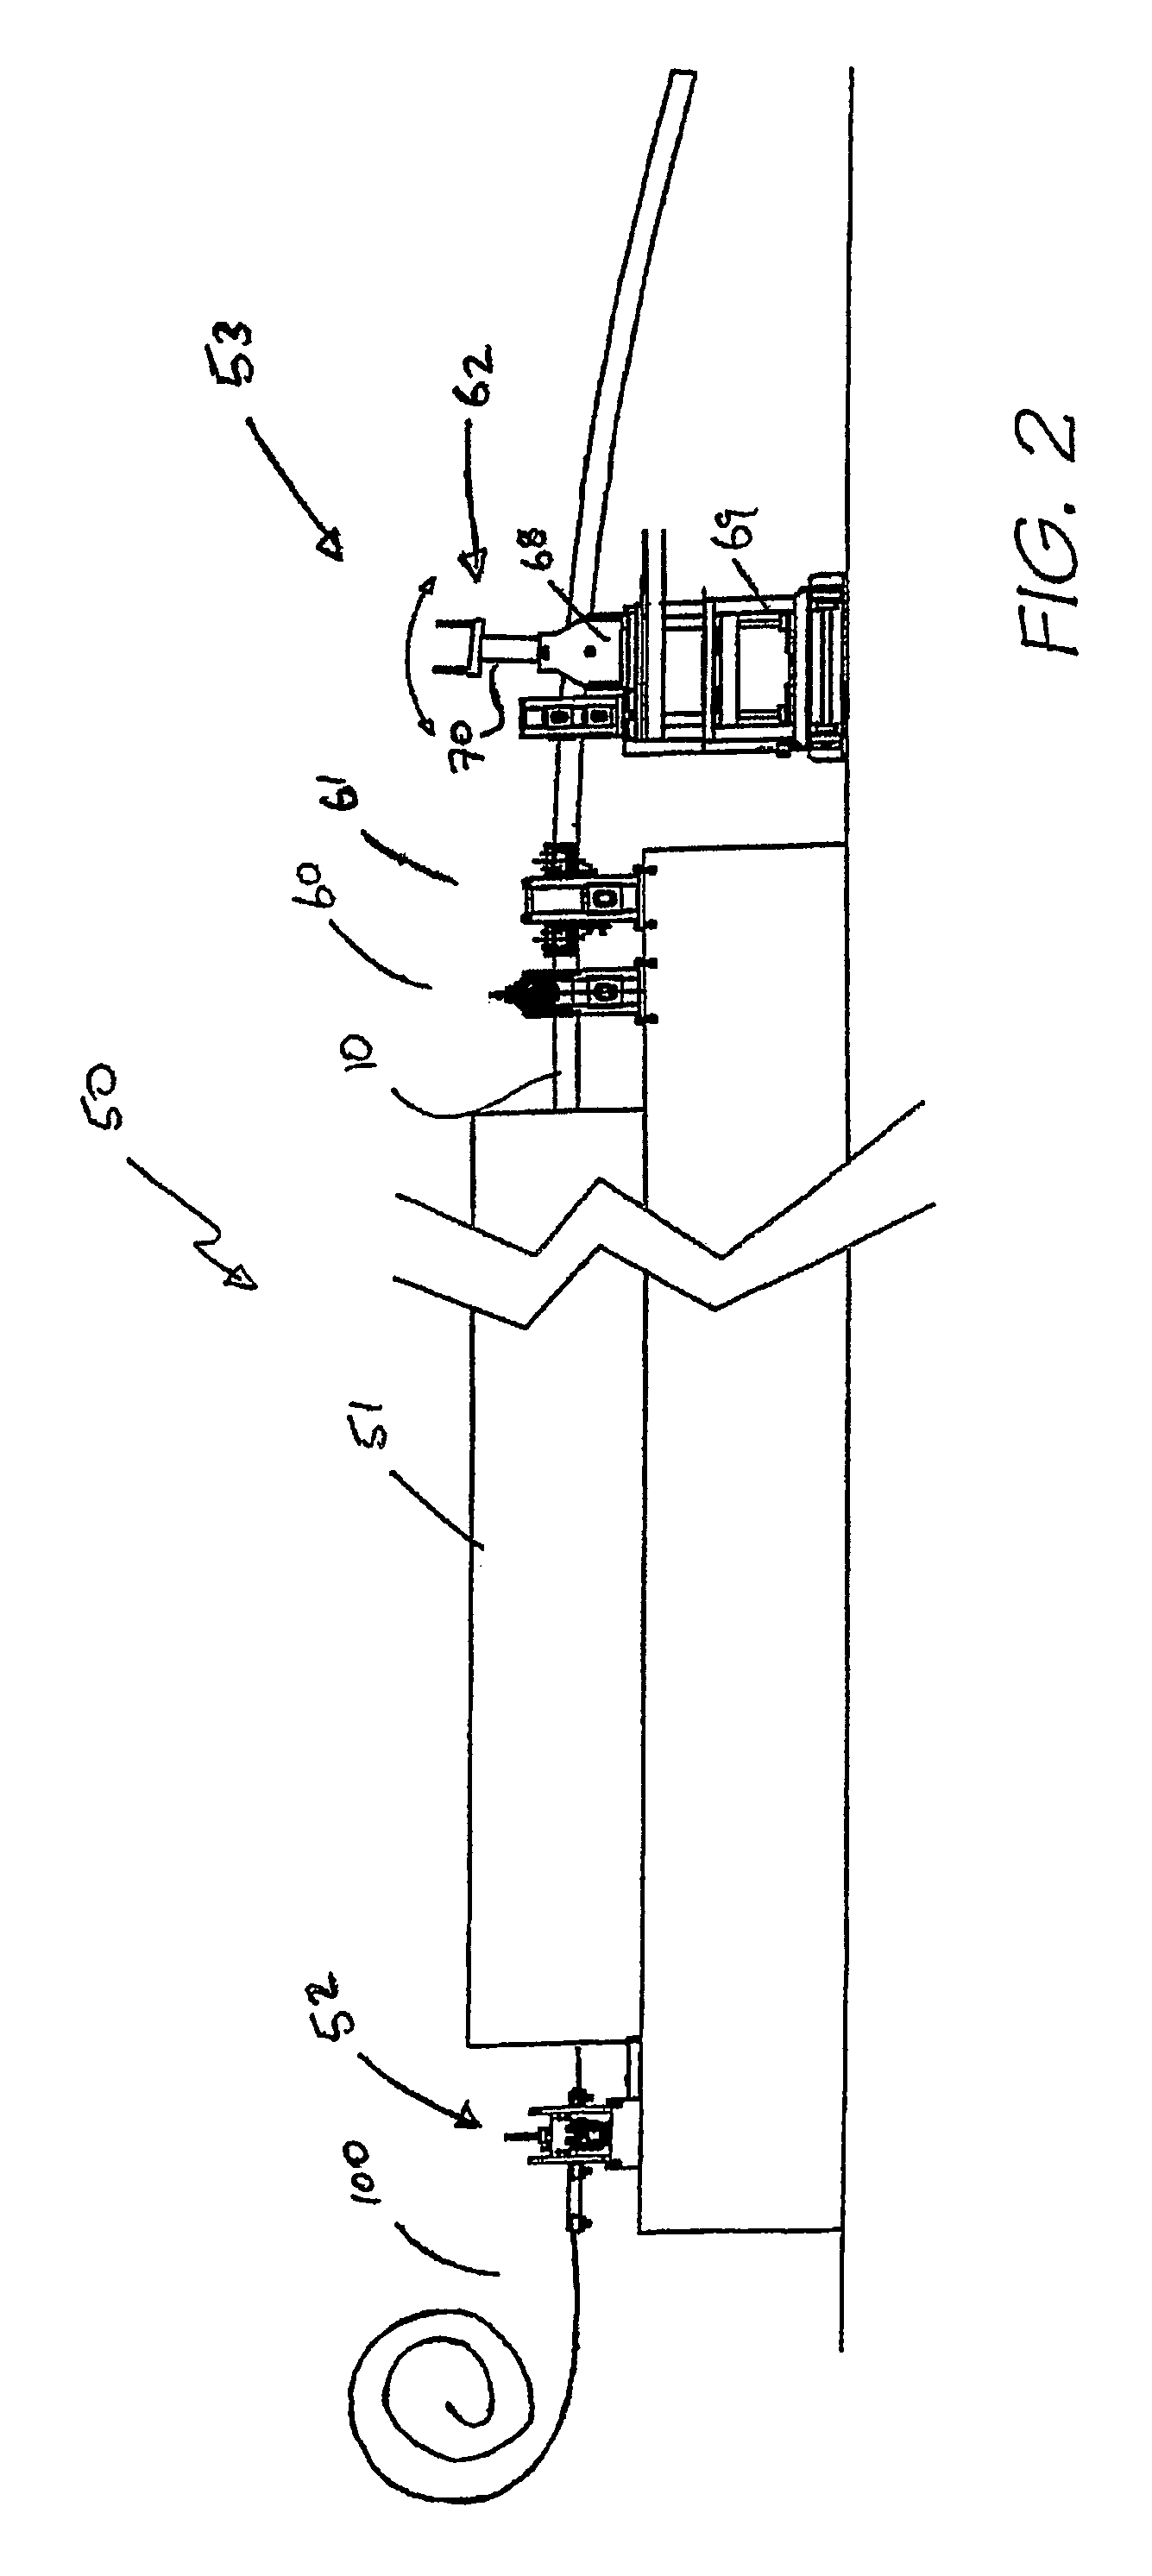 Forming apparatus for precambered metal sections